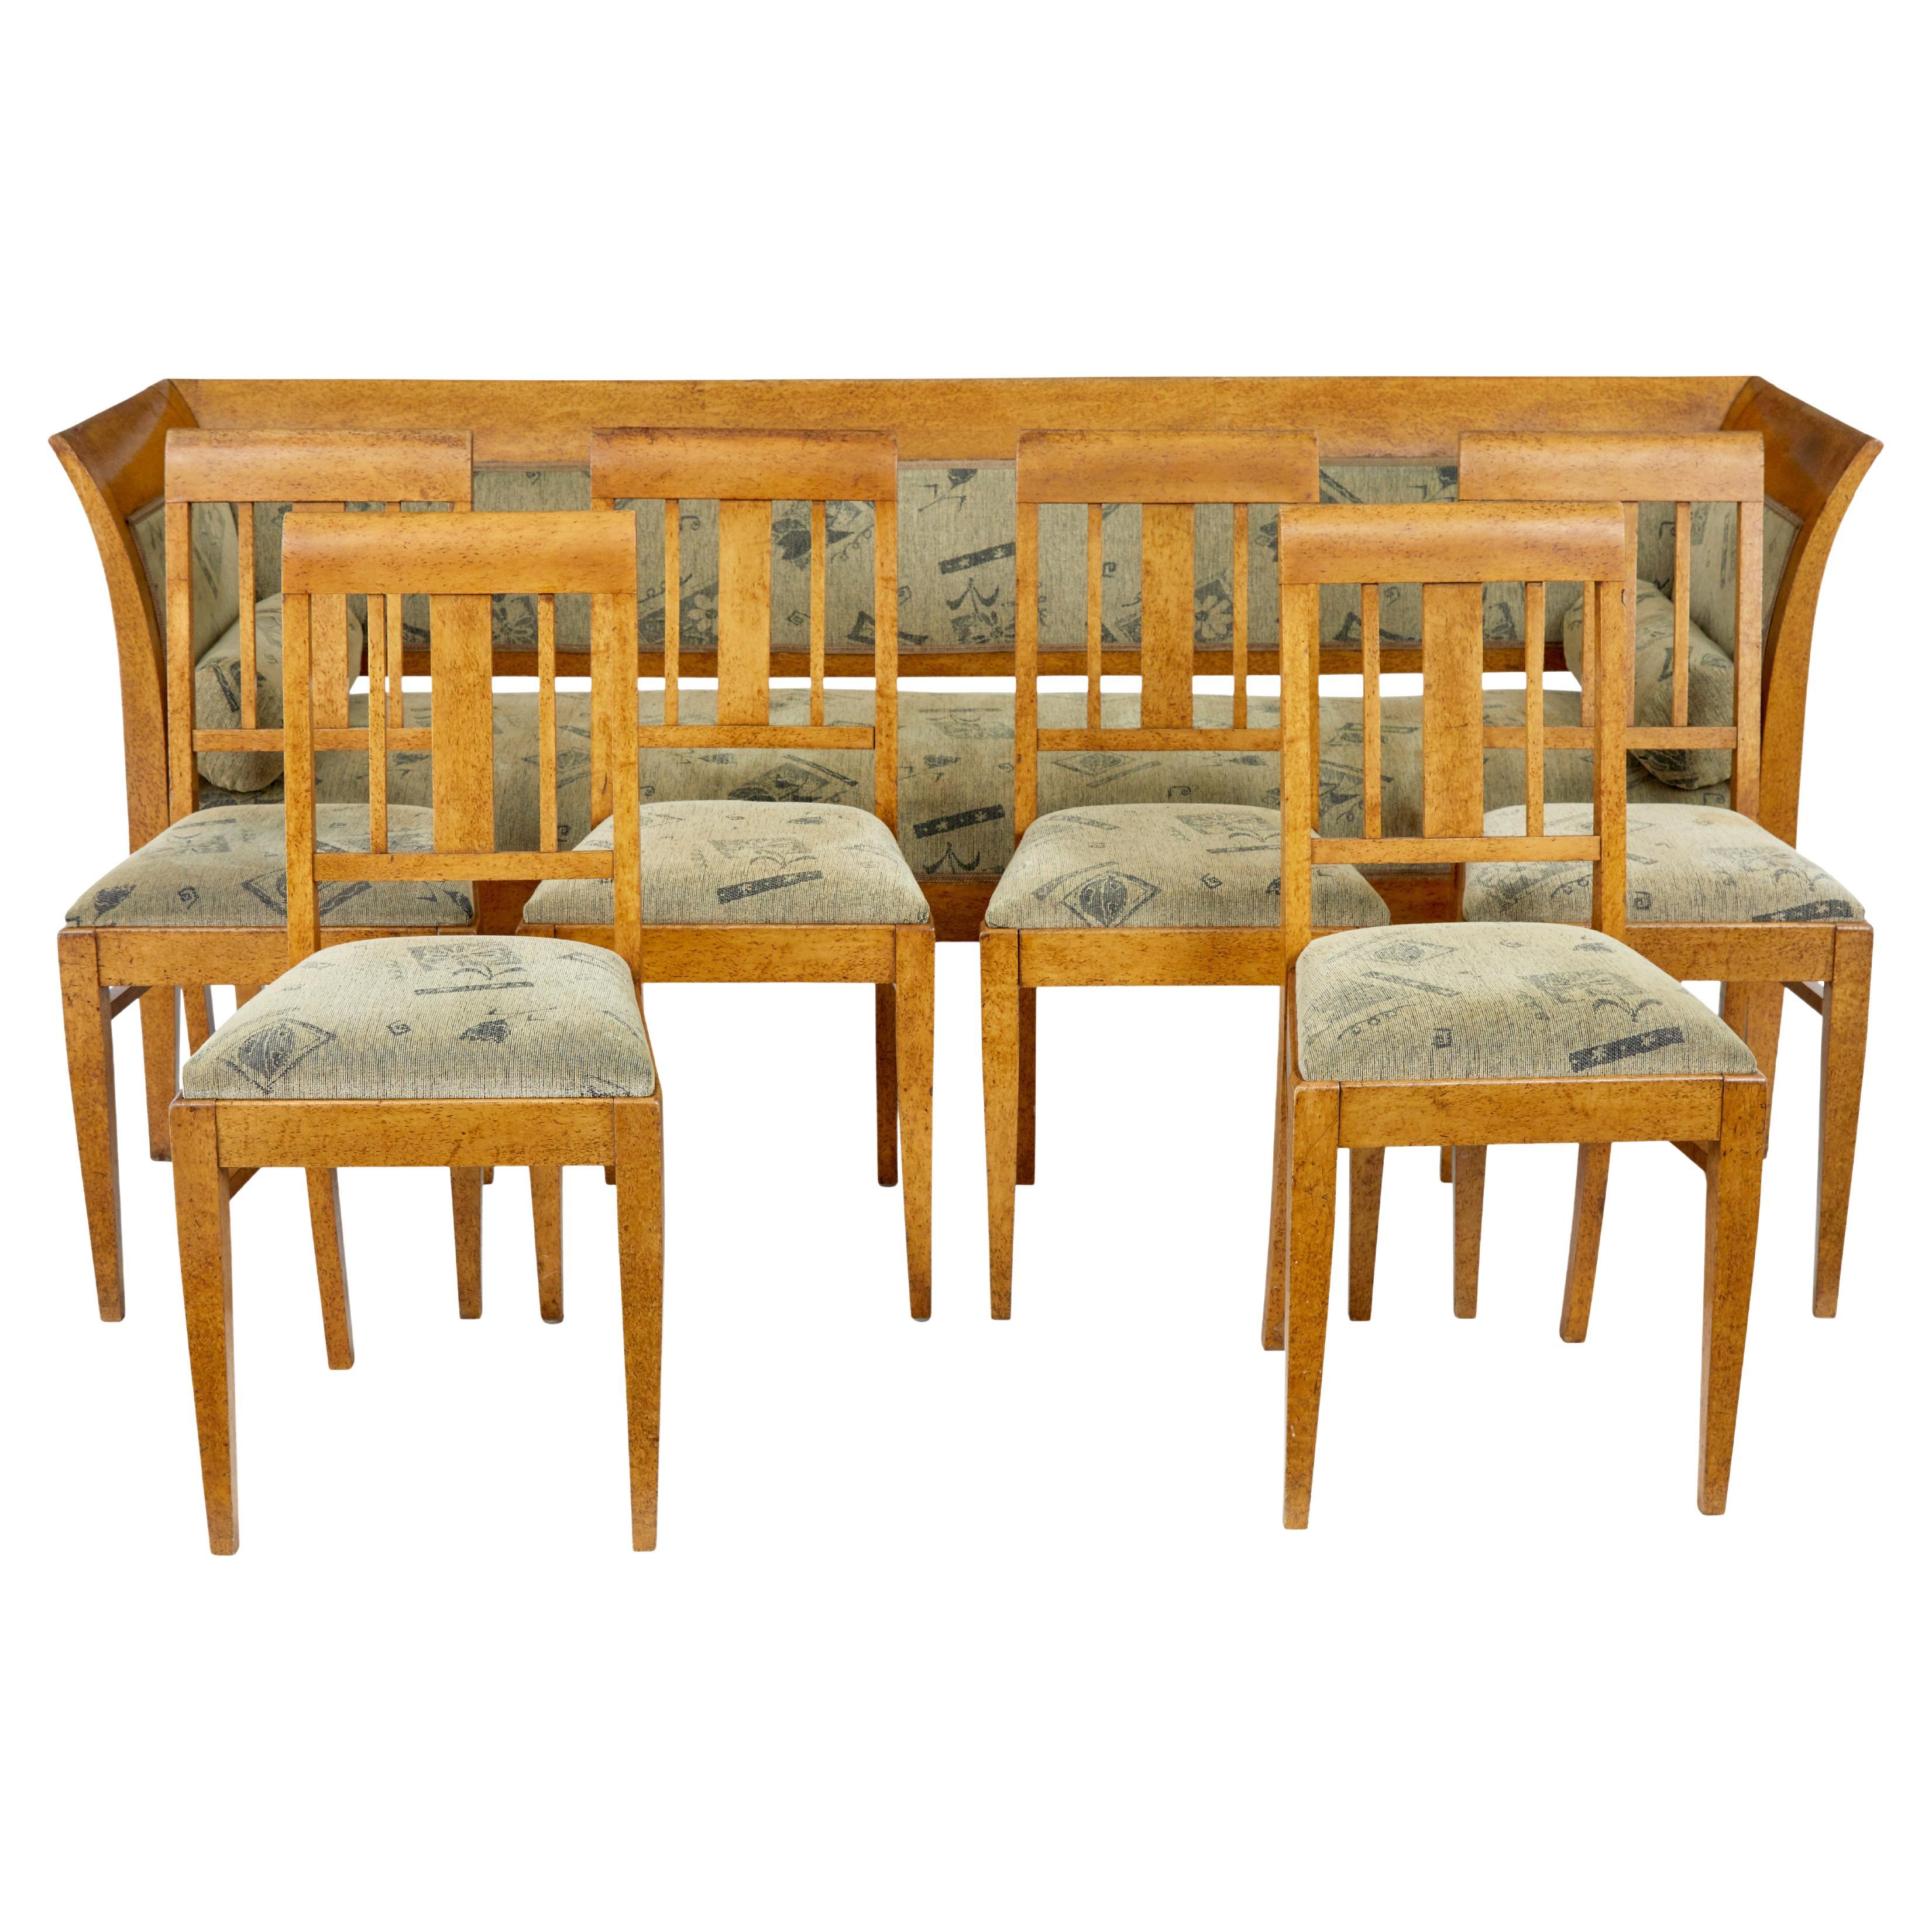 Late 19th century 7 piece burr birch living room suite For Sale